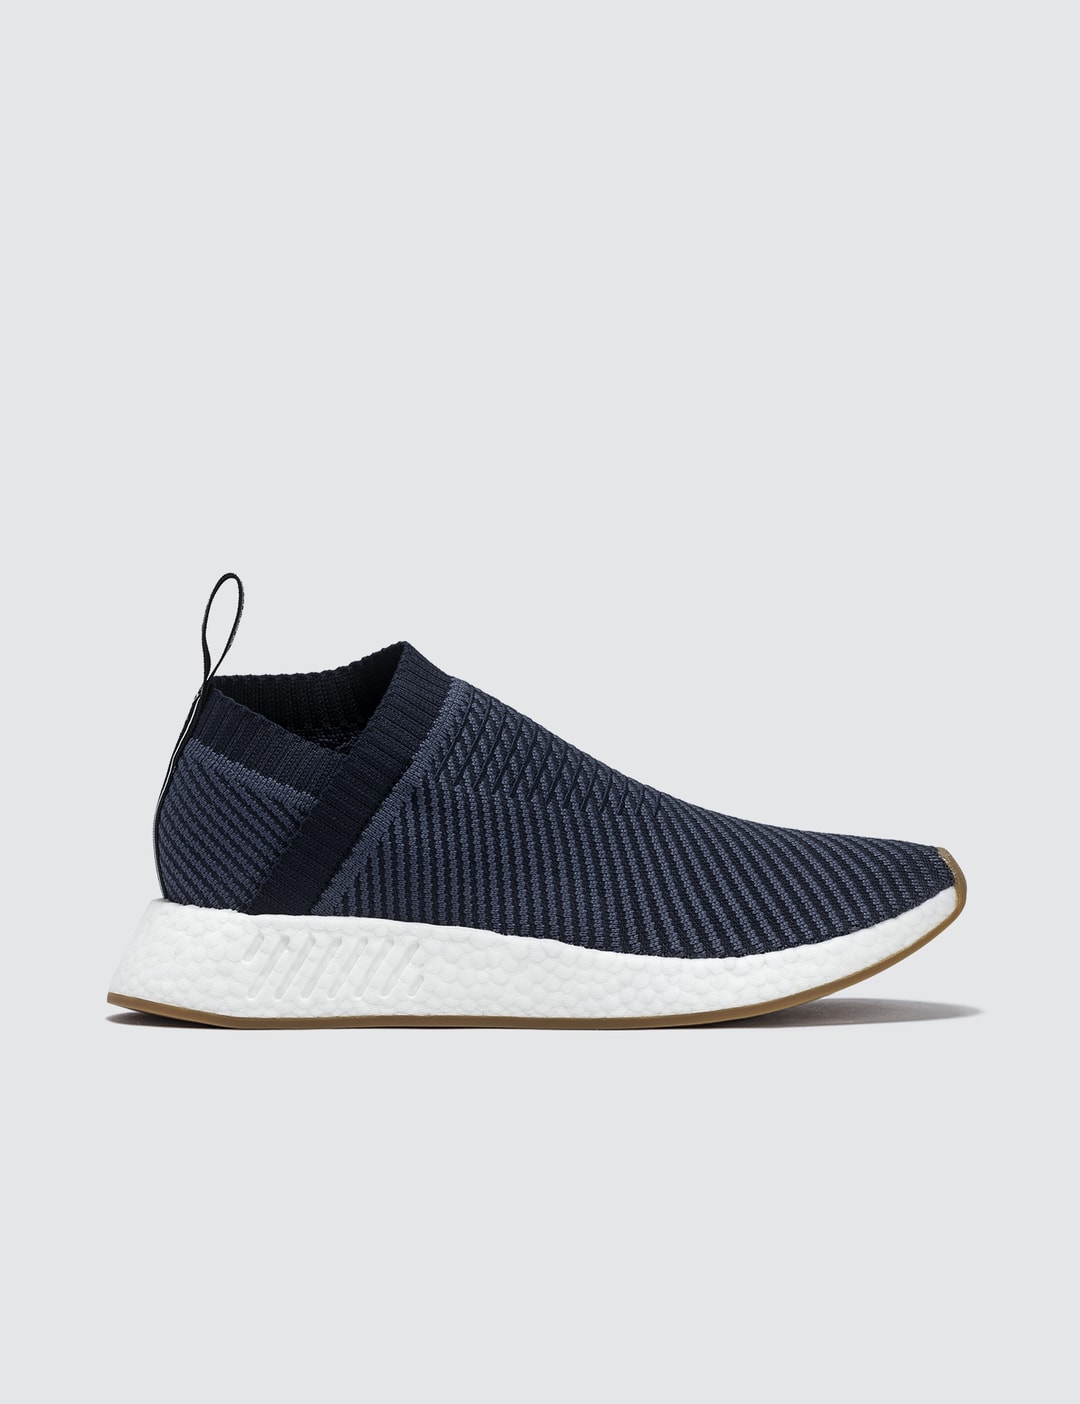 Adidas Originals - Nmd Cs2 Primeknit | Hbx - Globally Curated Fashion And  Lifestyle By Hypebeast